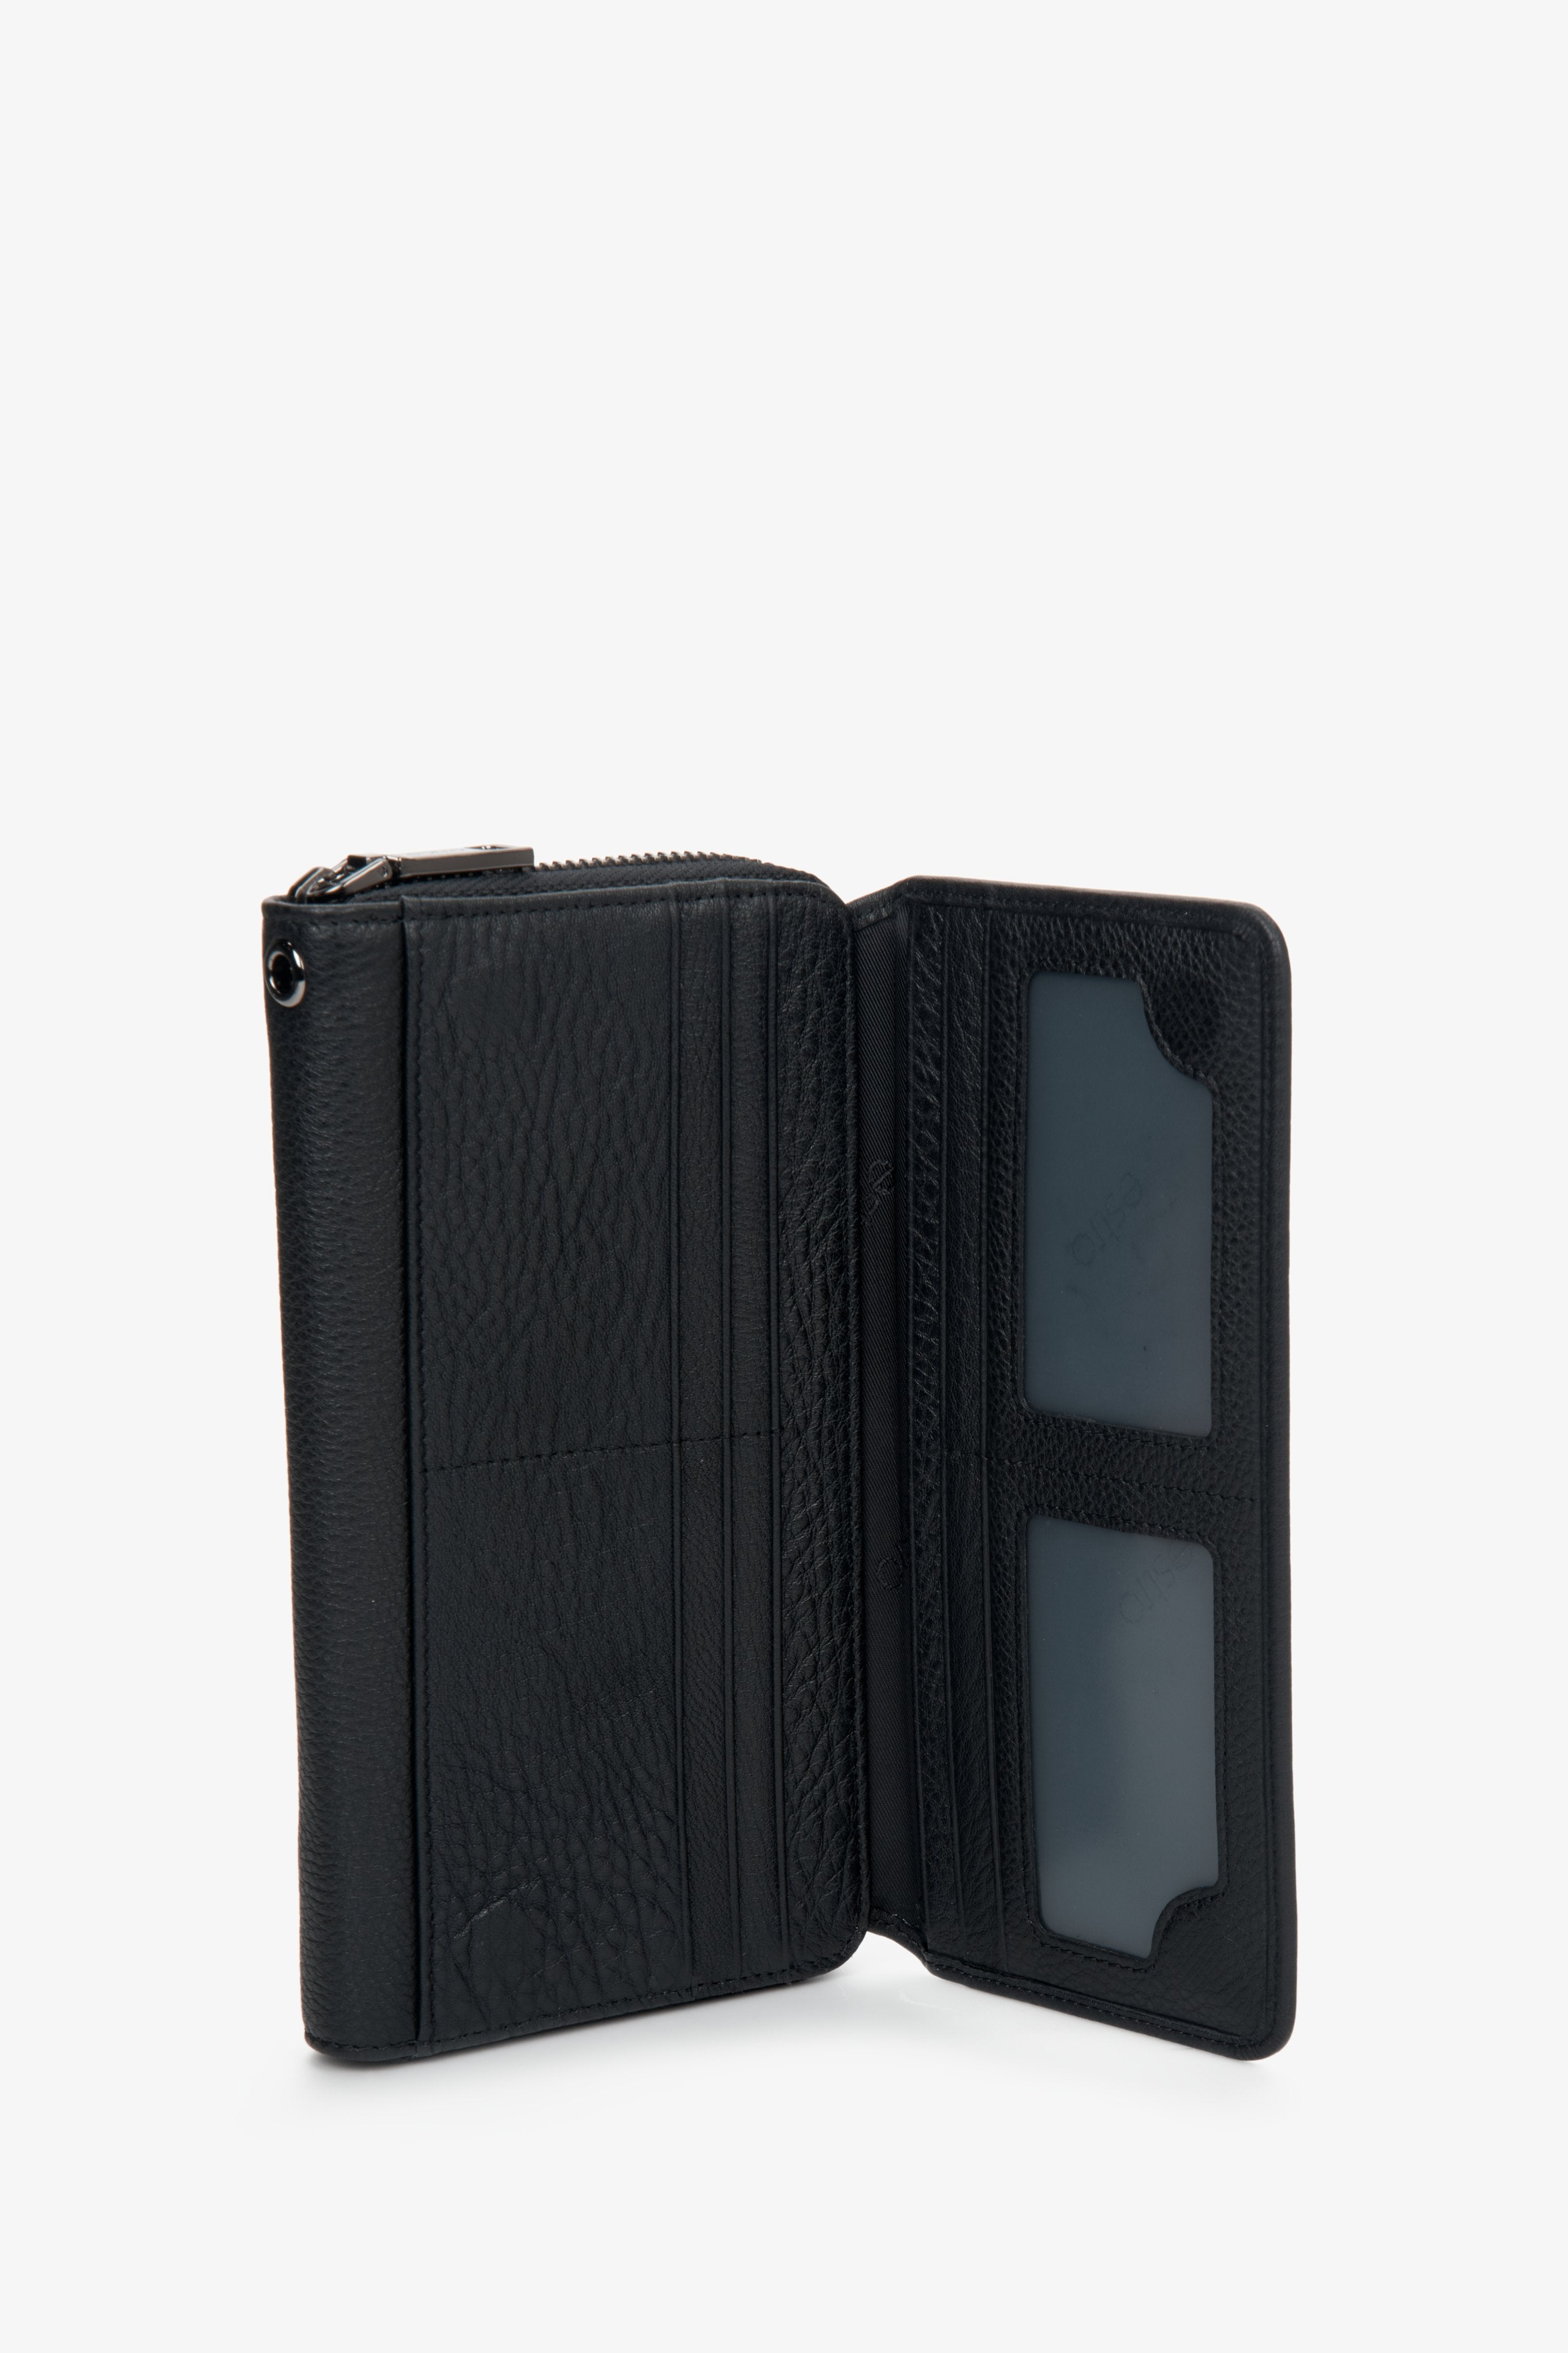 Estro men's black leather wallet - close-up on the interior of the model.